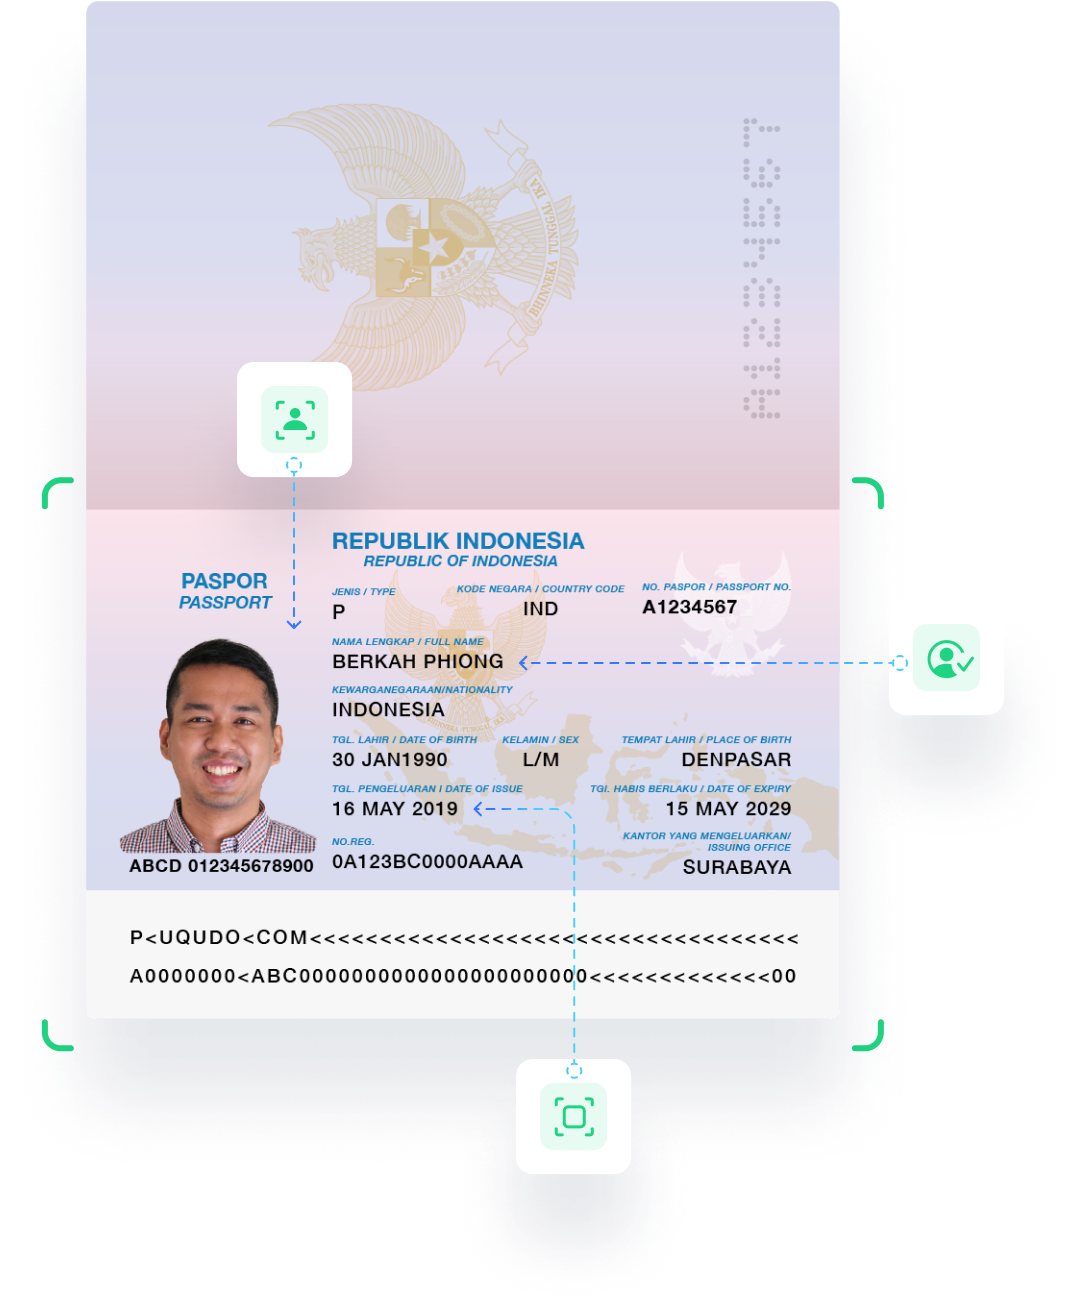 Passport AI scanning service providers in Indonesia